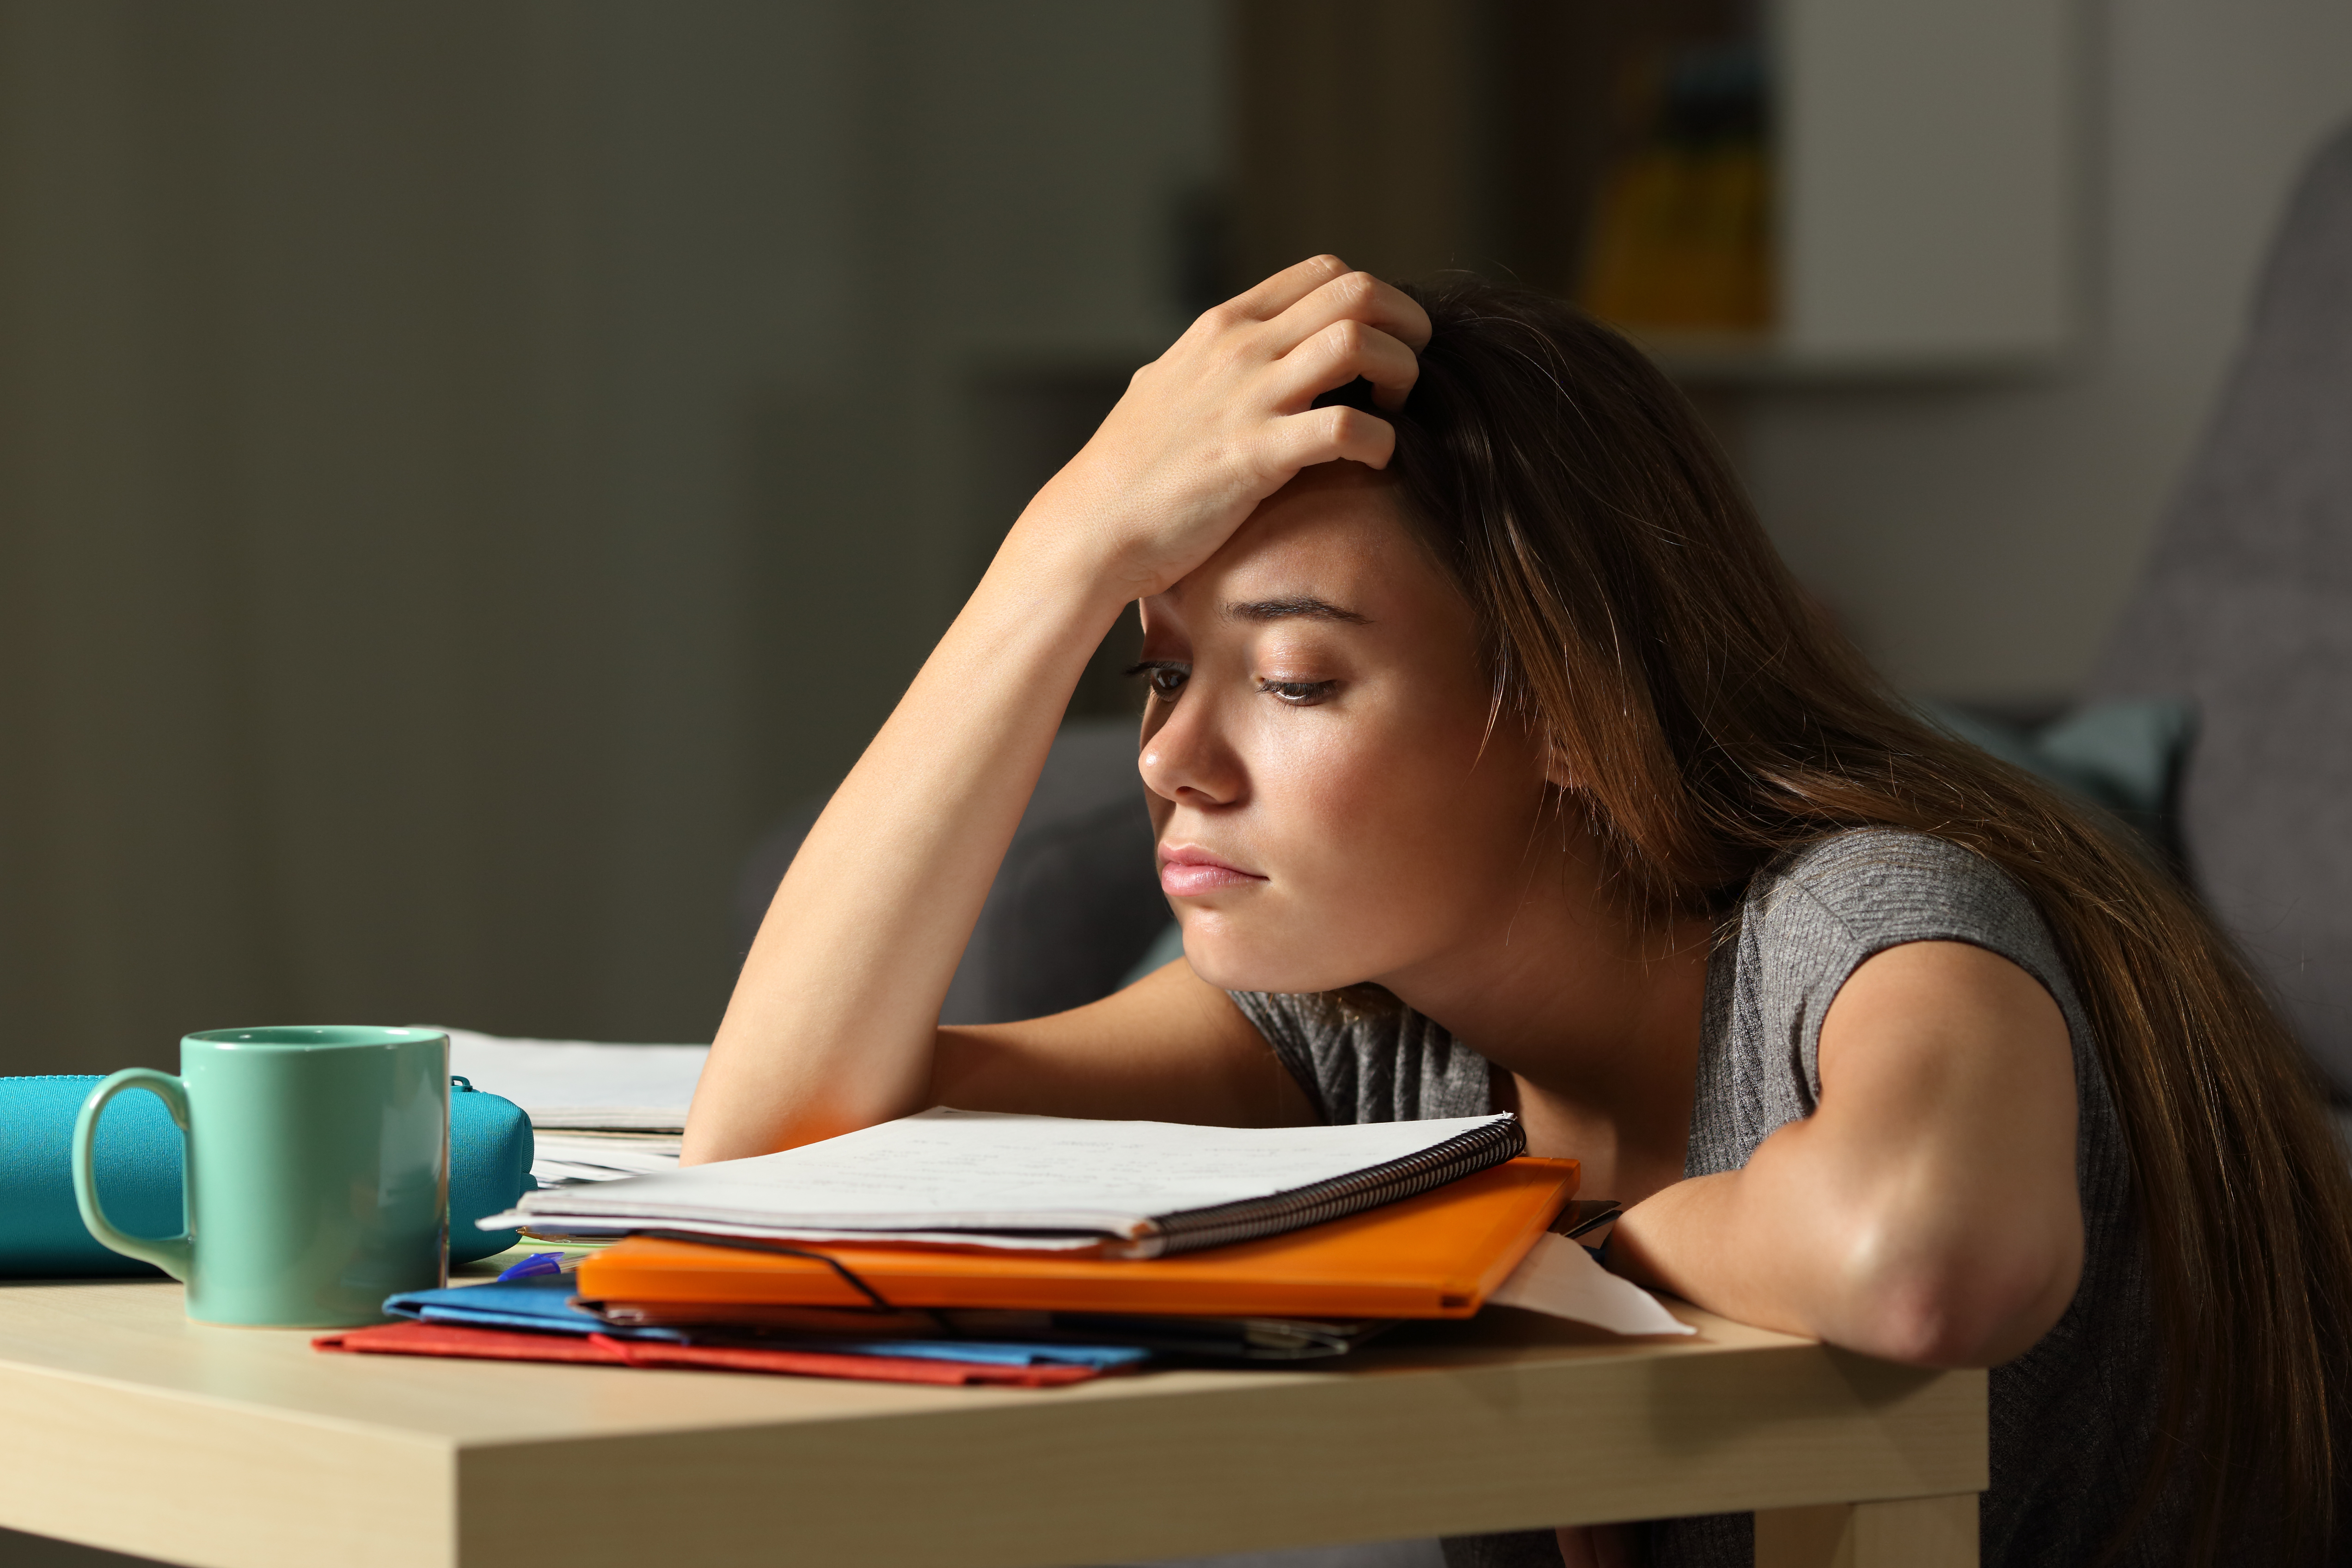 Tired student trying to study | Source: Shutterstock